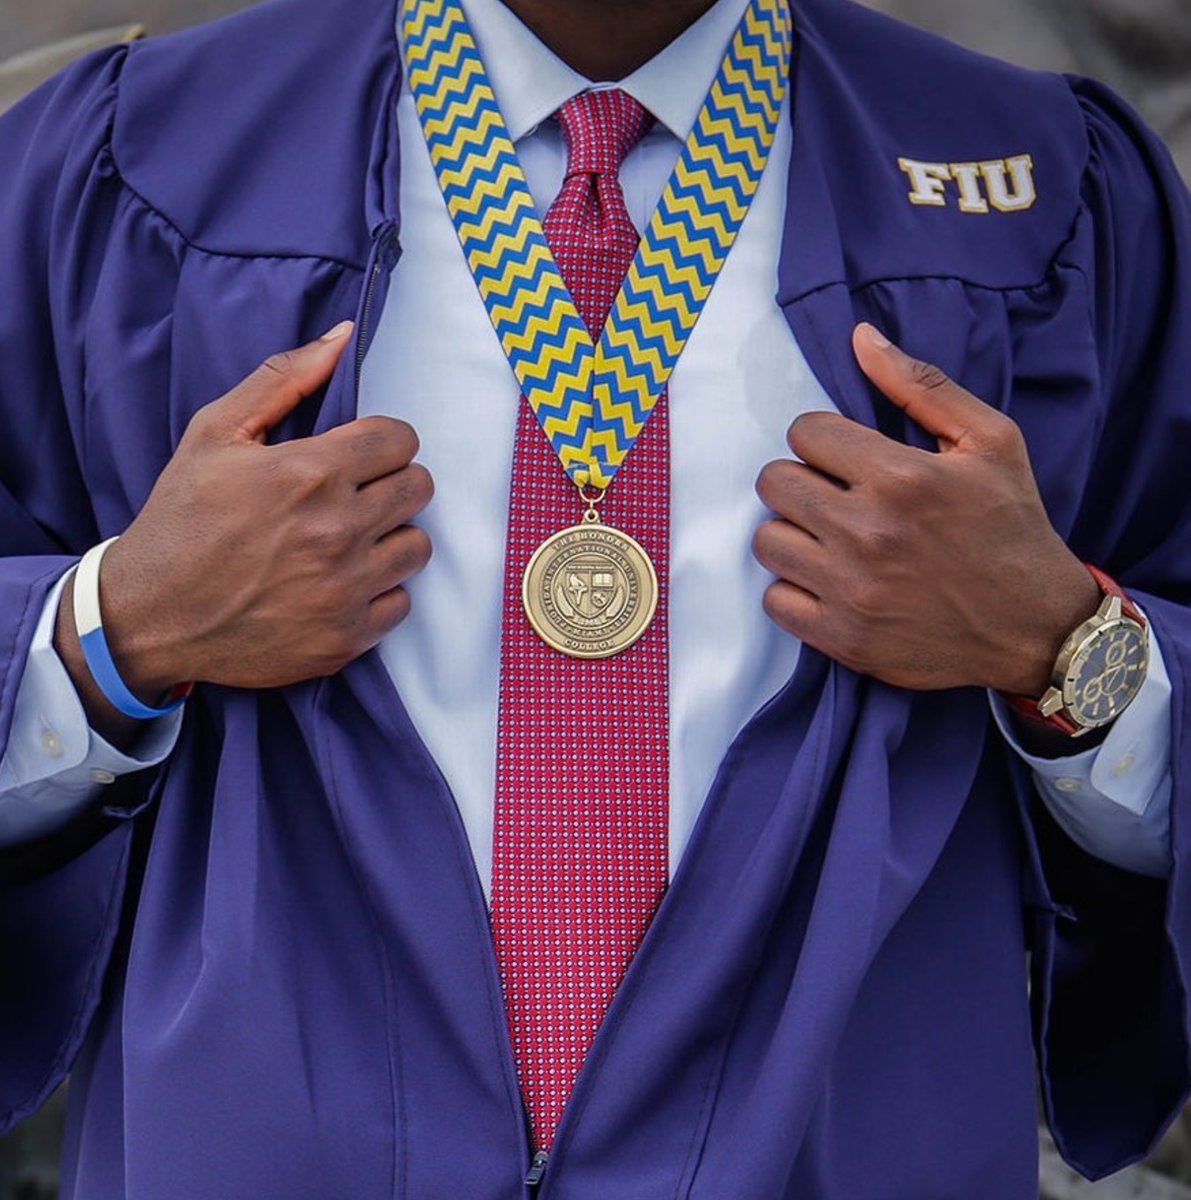 Whenever you see this medallion at a graduation ceremony or in a picture, know that it is a sign of excellence earned by a graduating senior of The Honors College at Florida International University (FIU). Day 2 Fall 2023 Commencement. @FIU @FIUnews